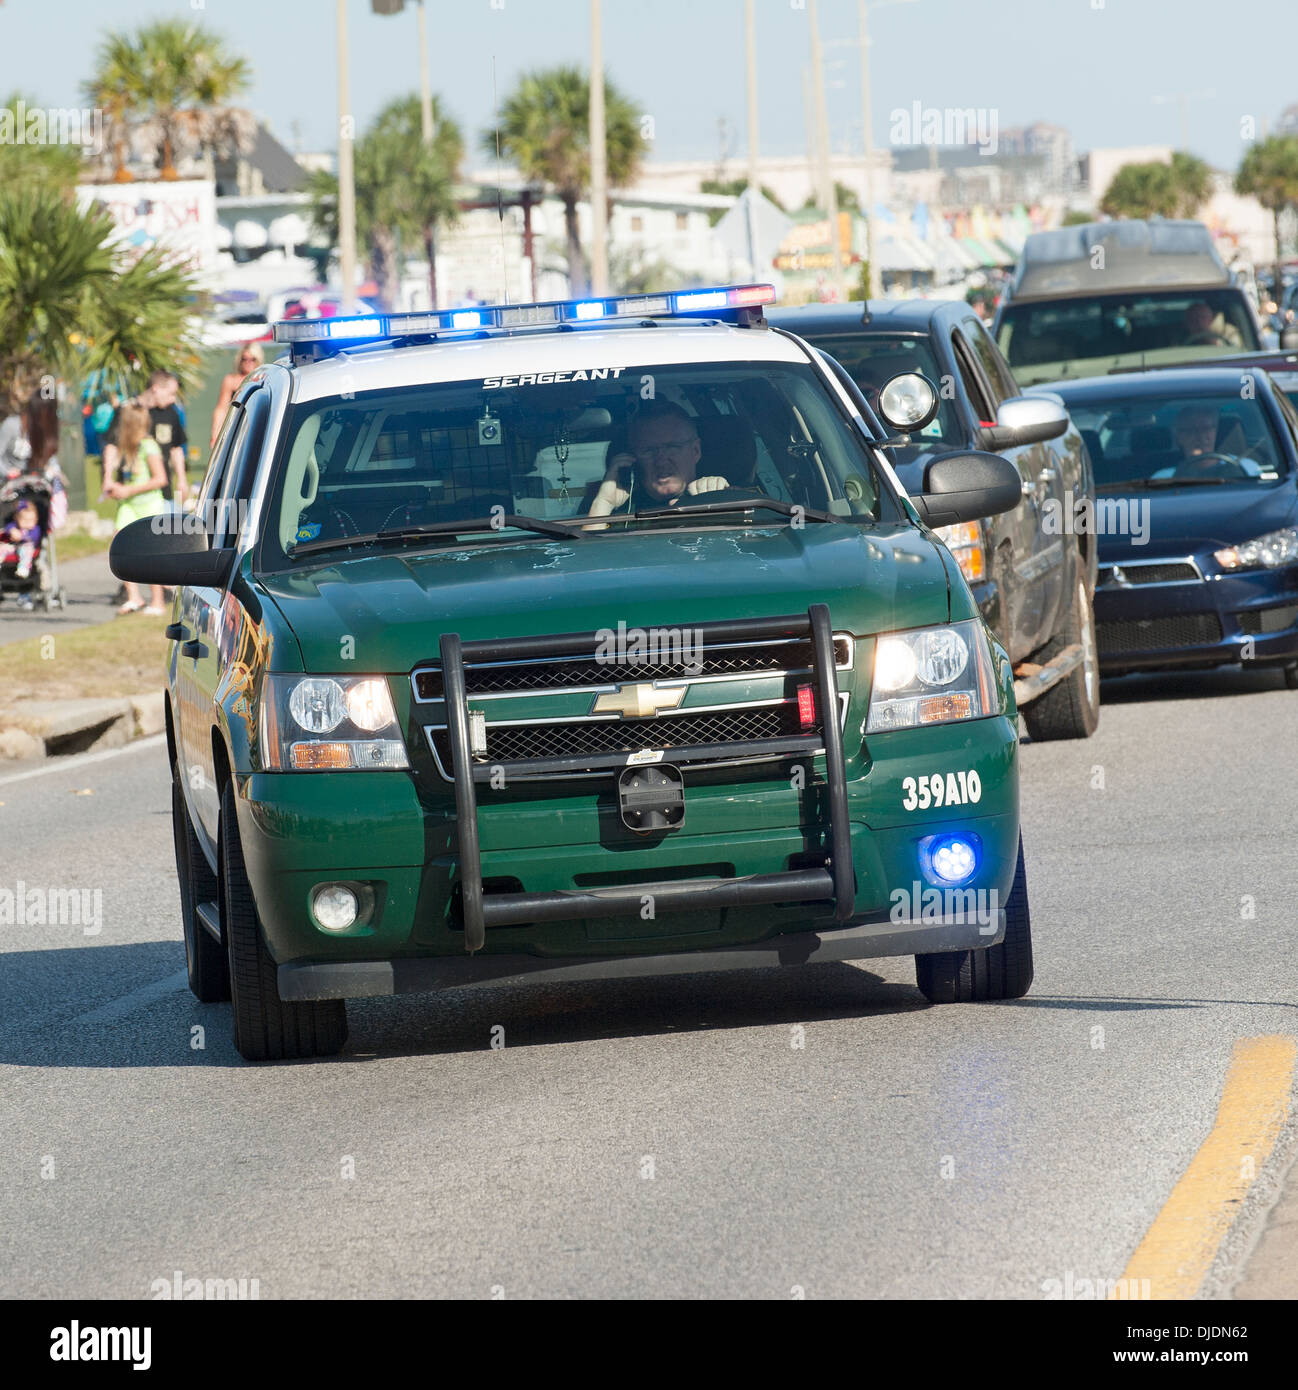 Sargeant's car of the Sheriffs Department driving on a blue light USA Stock Photo